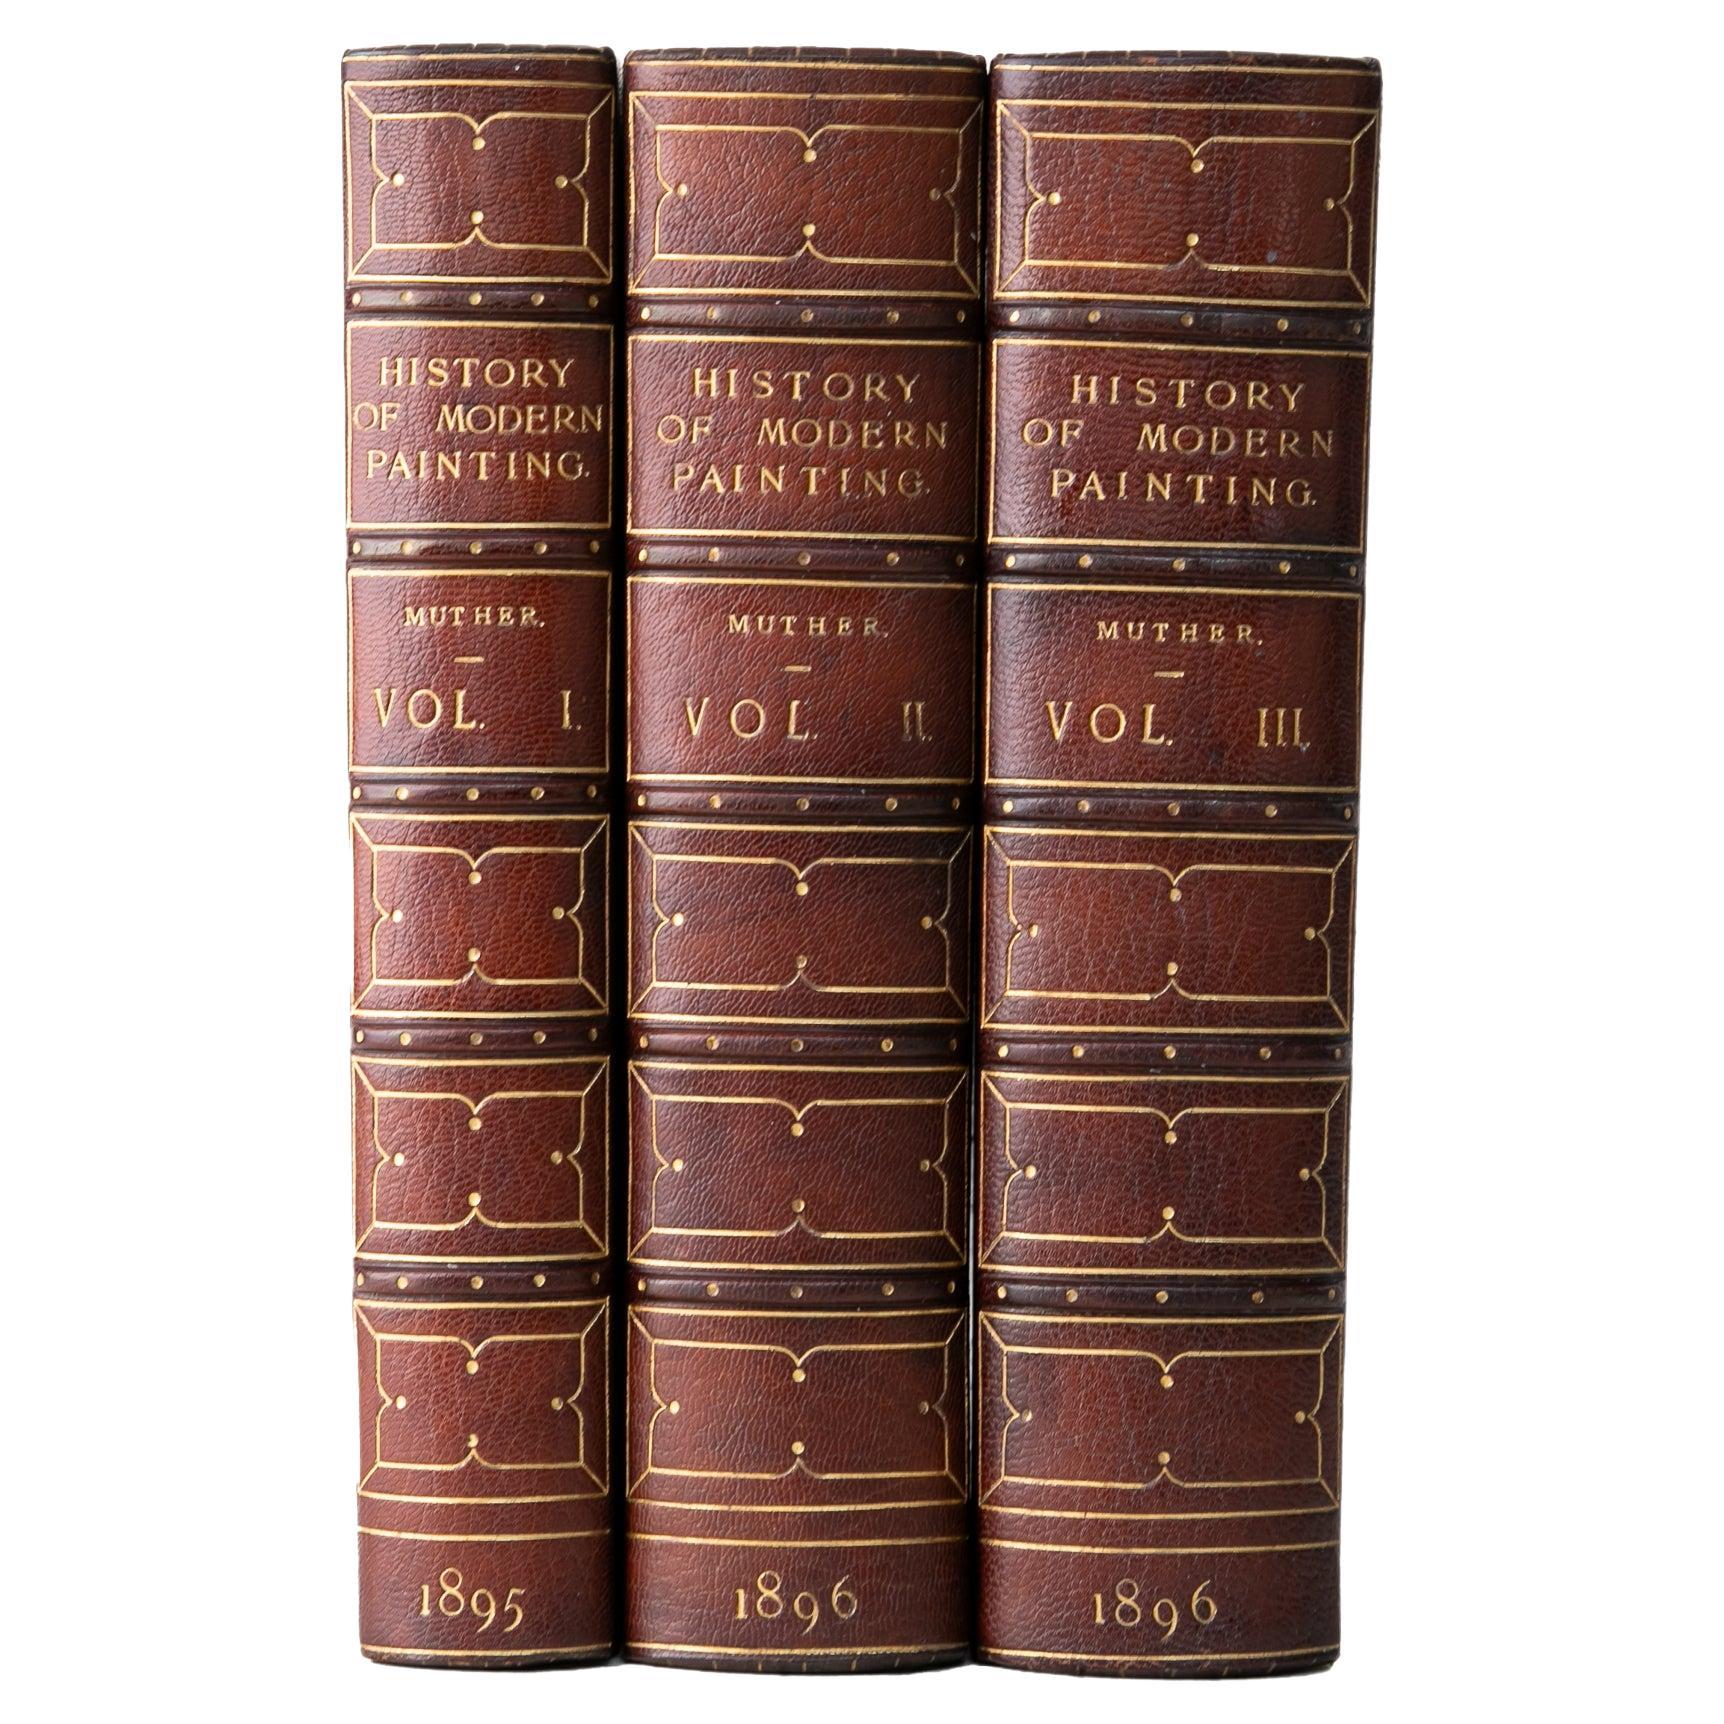 3 Volumes. Richard Muther, The History of Modern Painting.  For Sale